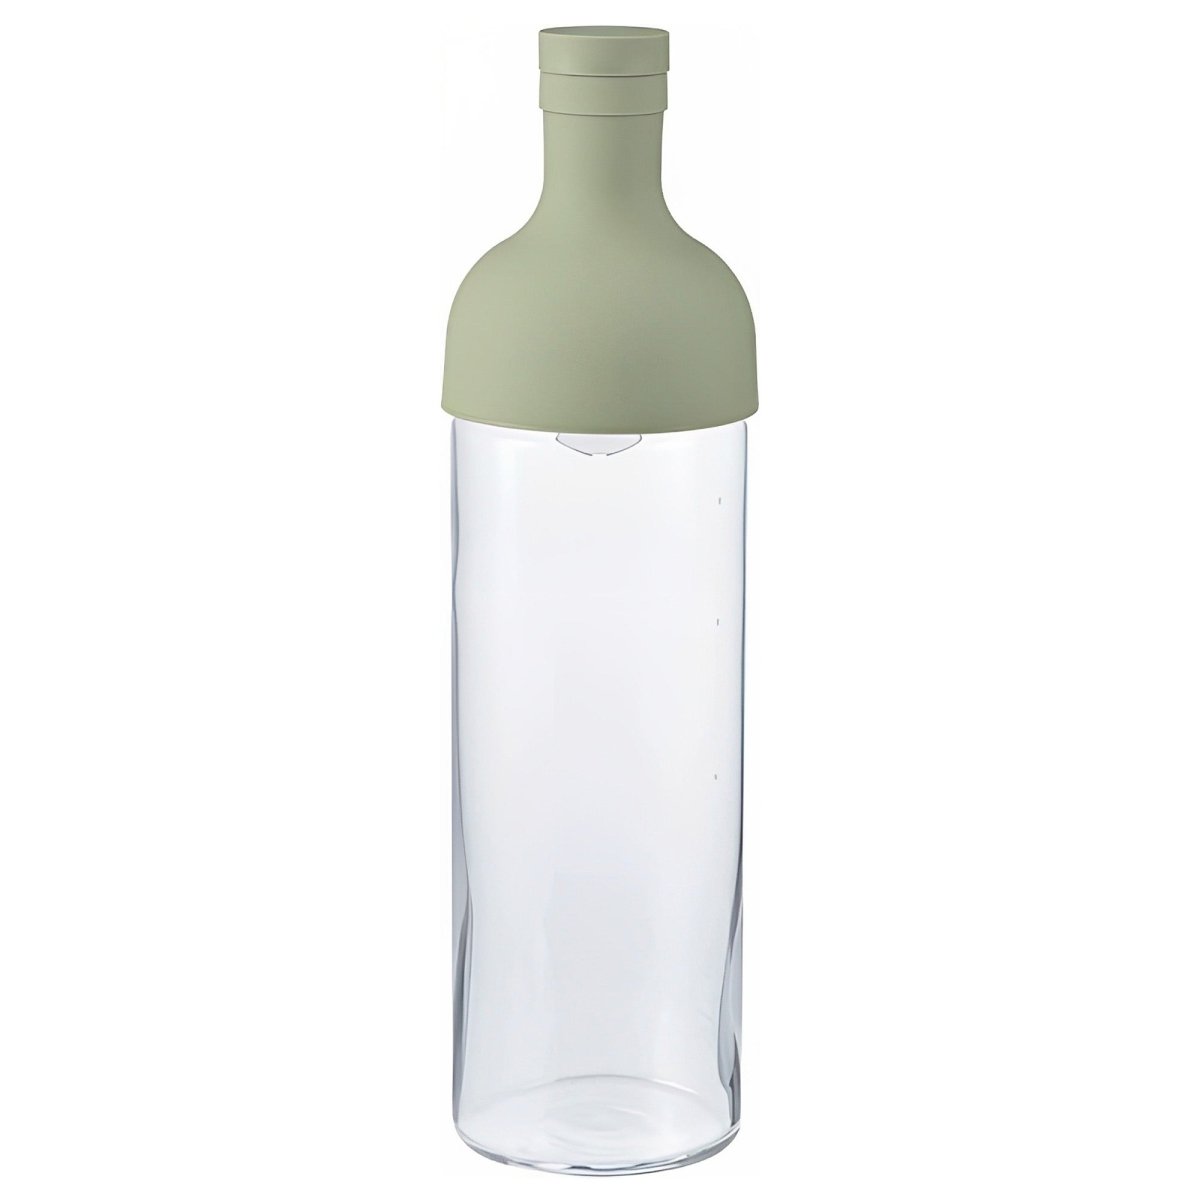 Hario Filter - In Bottle for Cold Brew Tea - Green Top